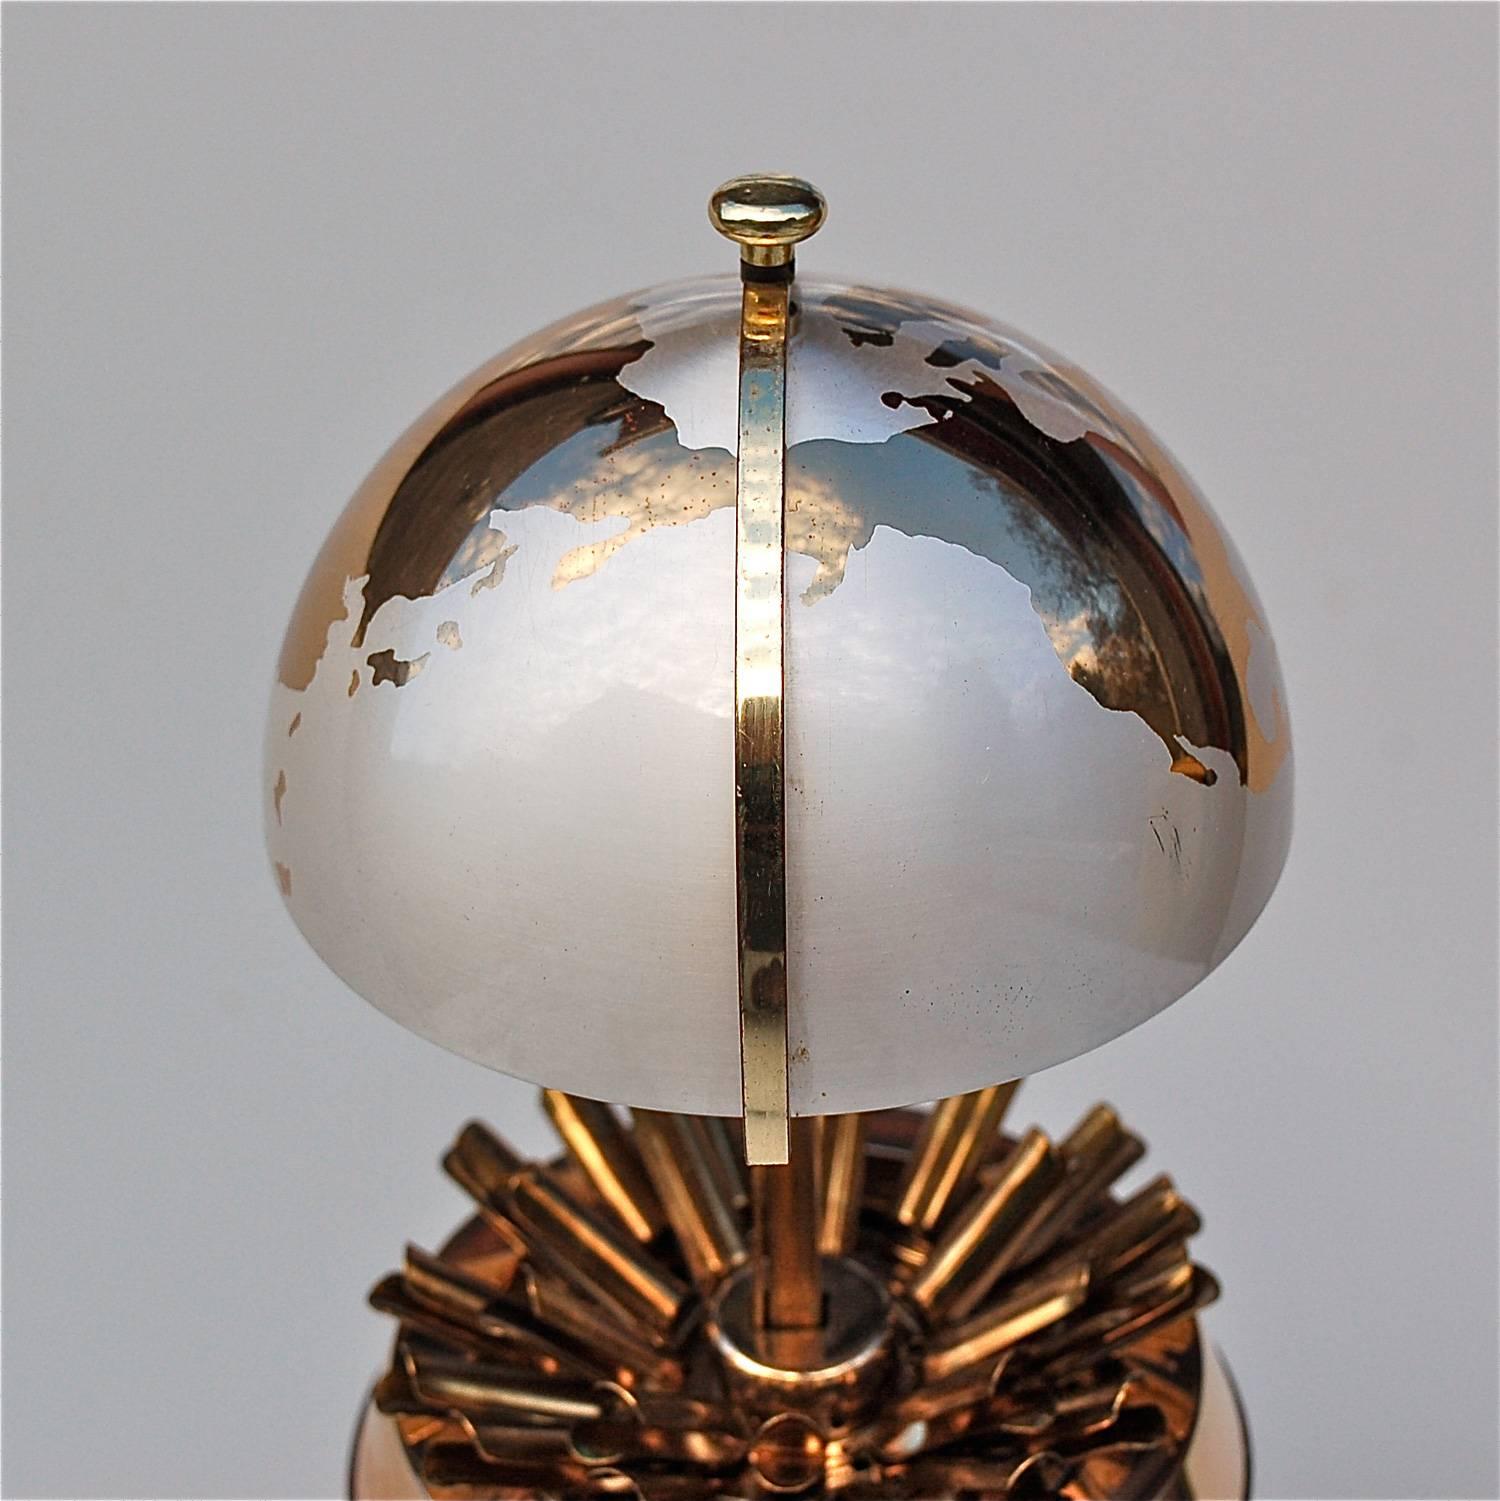 At first sight, you'd never imagine this weighty, shiny globe would morph into a cigarette dispenser. By a simple pull at the top axis, the top hemisphere slides open revealing the inner compartment with room for 25 cigarettes. This lovely